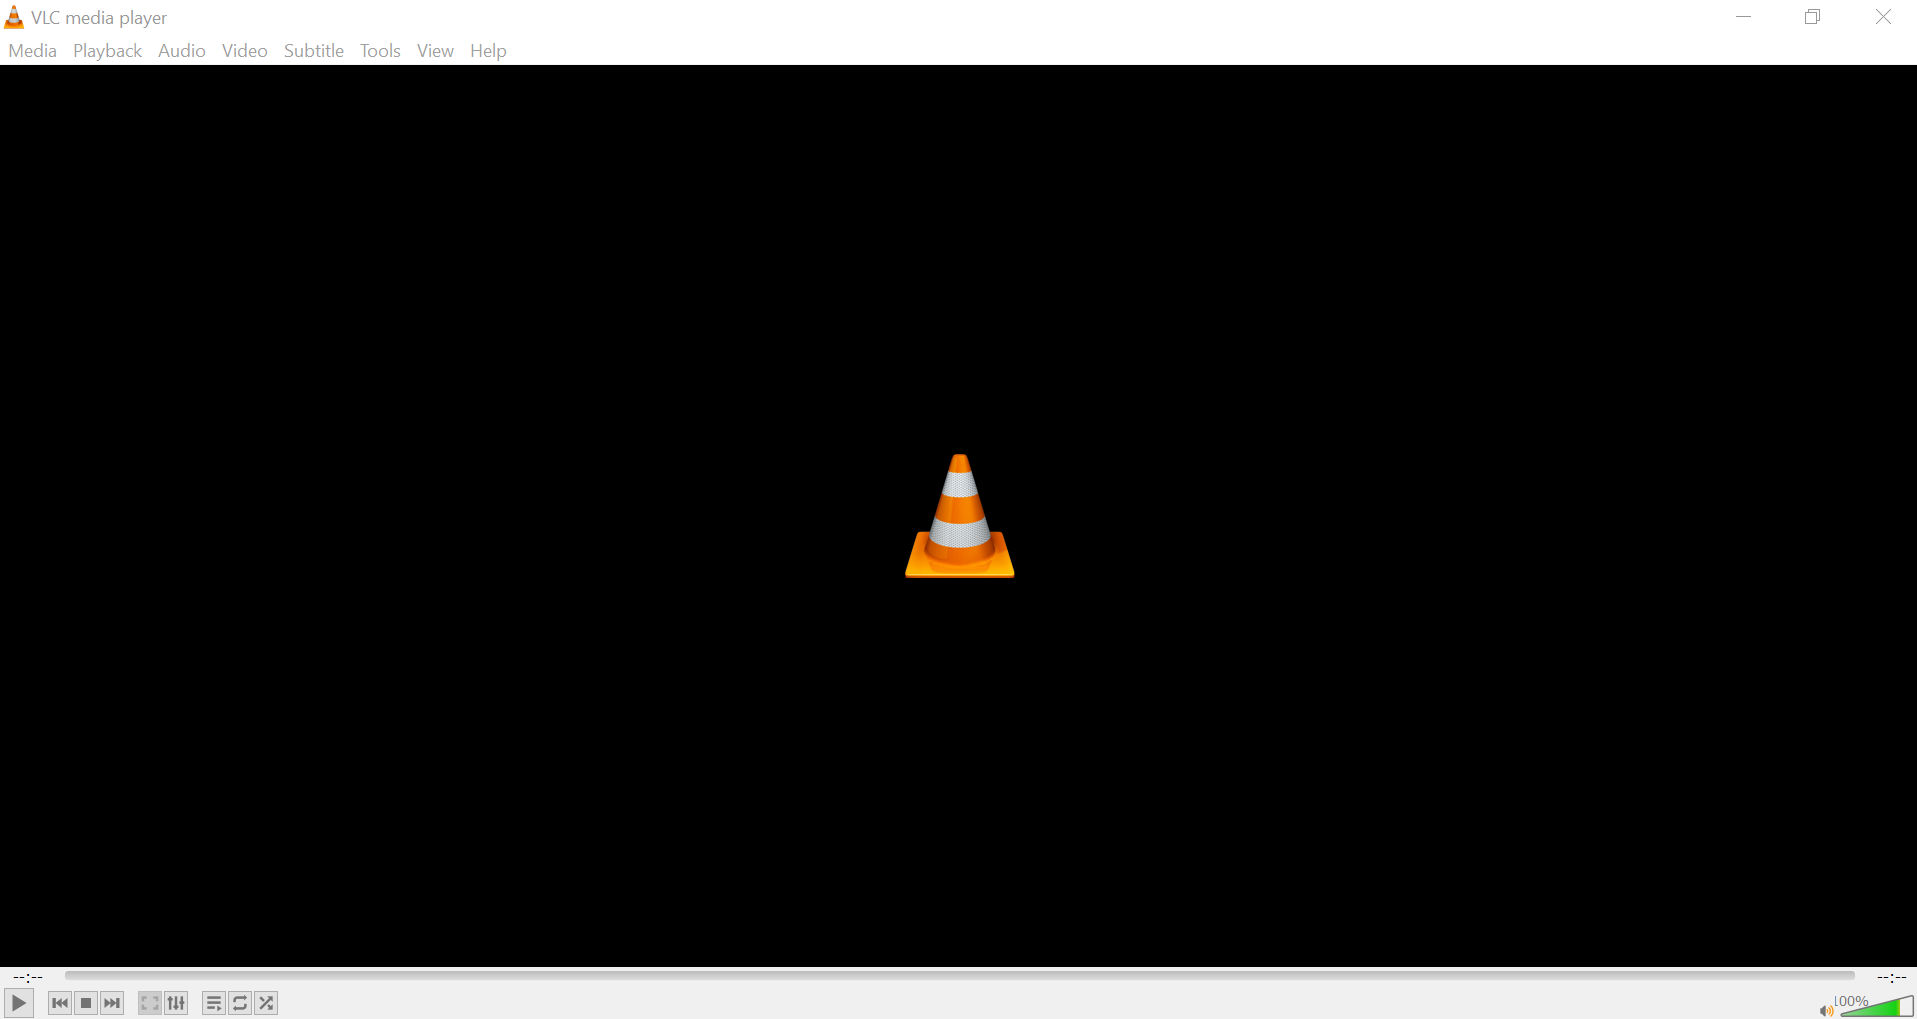 A browser window showing the VLC Media Player.